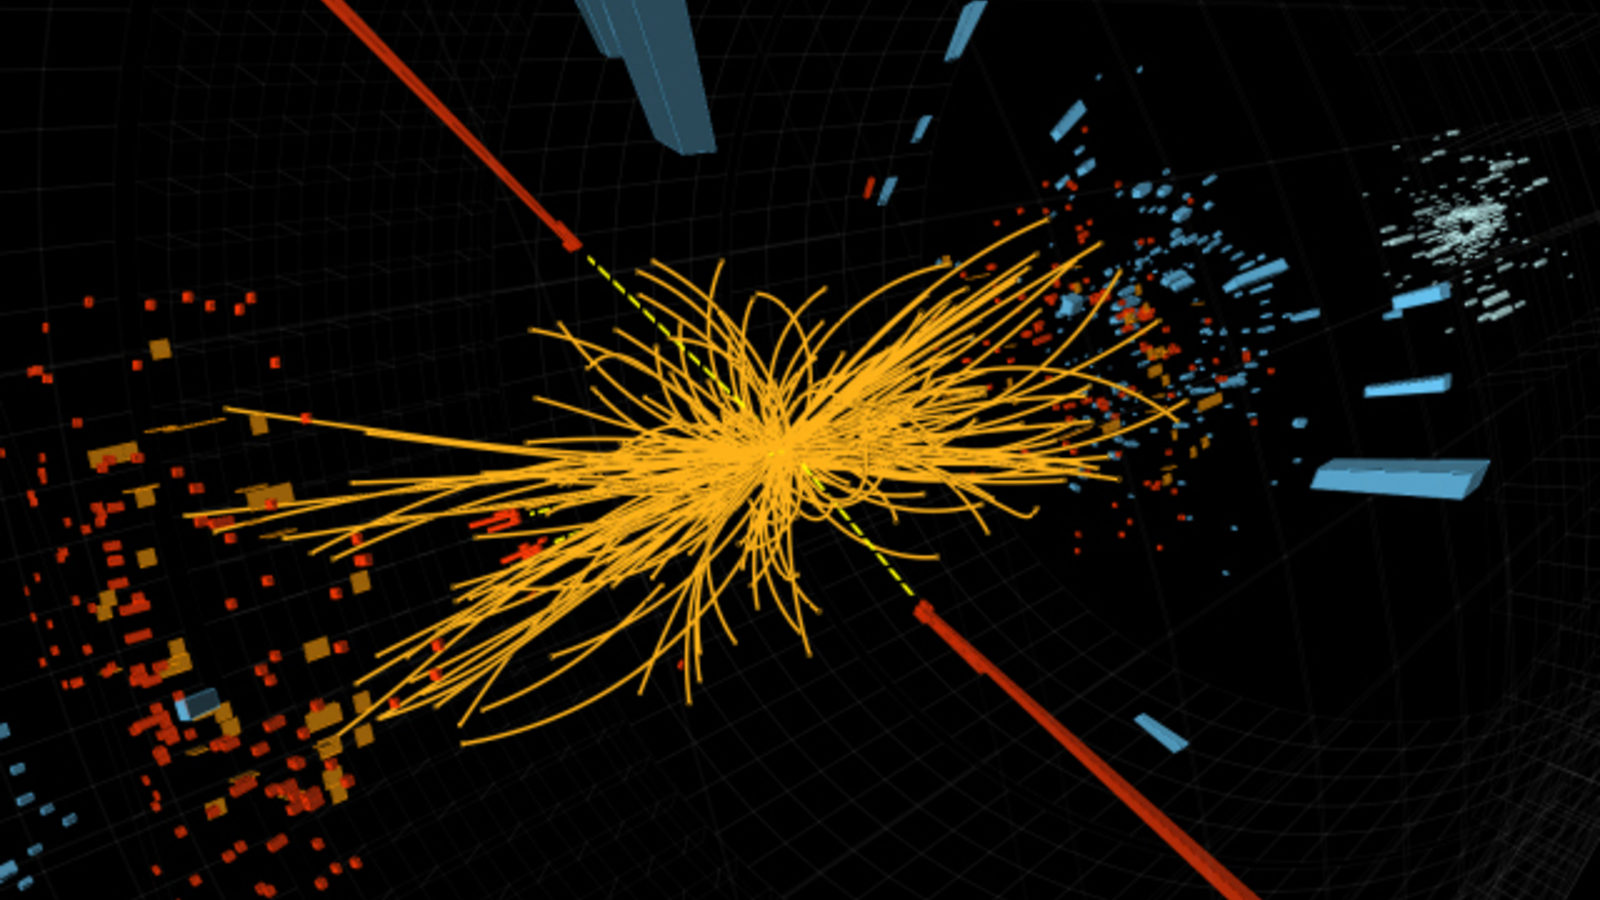 What Is The Higgs Boson Particle And Where Does It Come From?